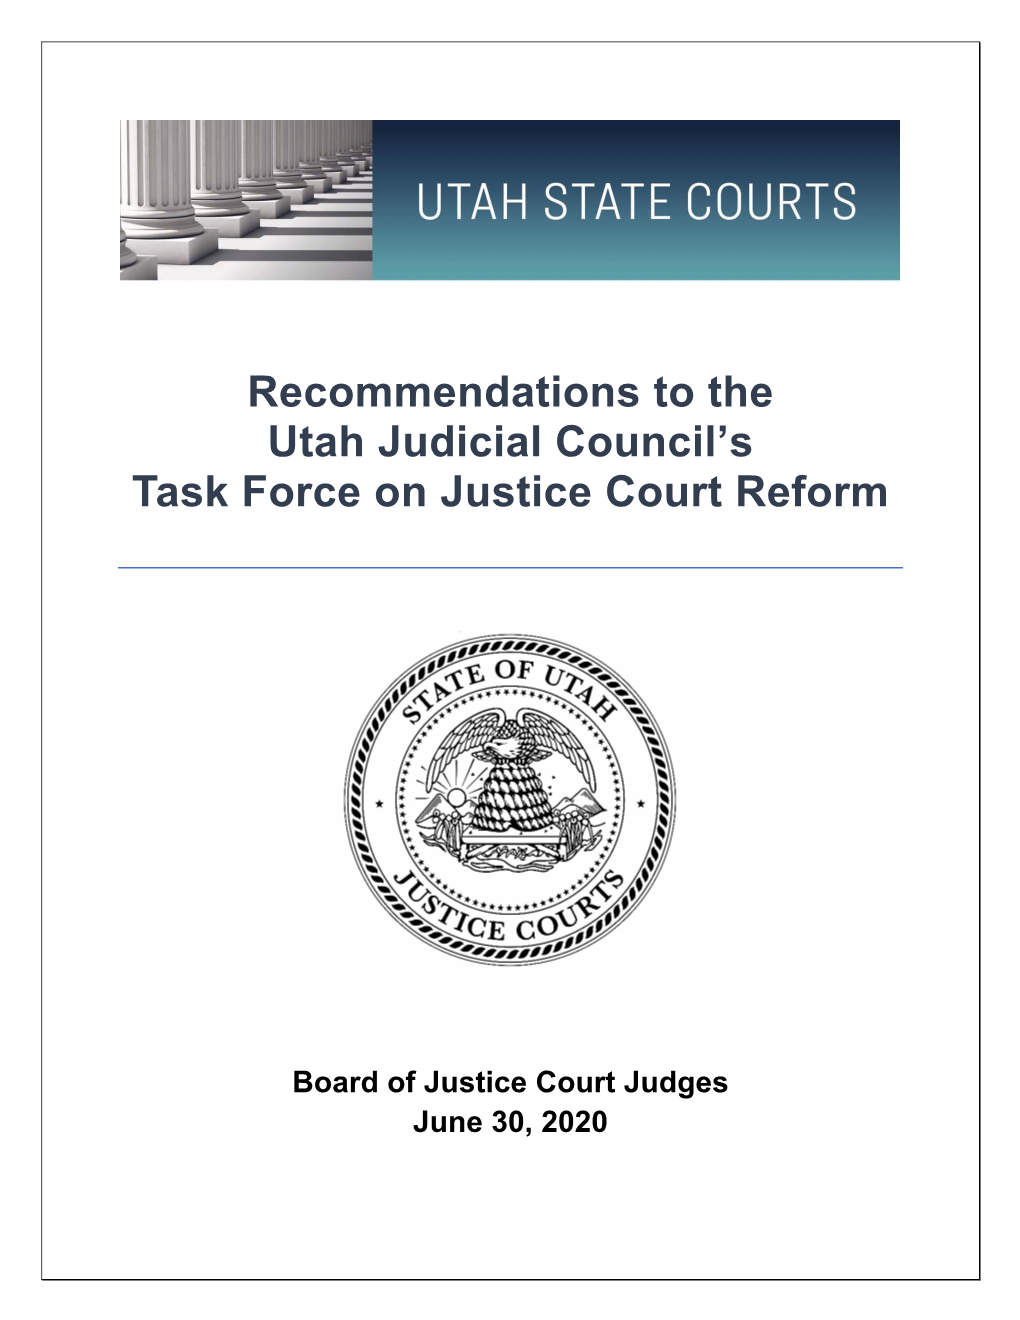 Recommendations to the Utah Judicial Council's Task Force On